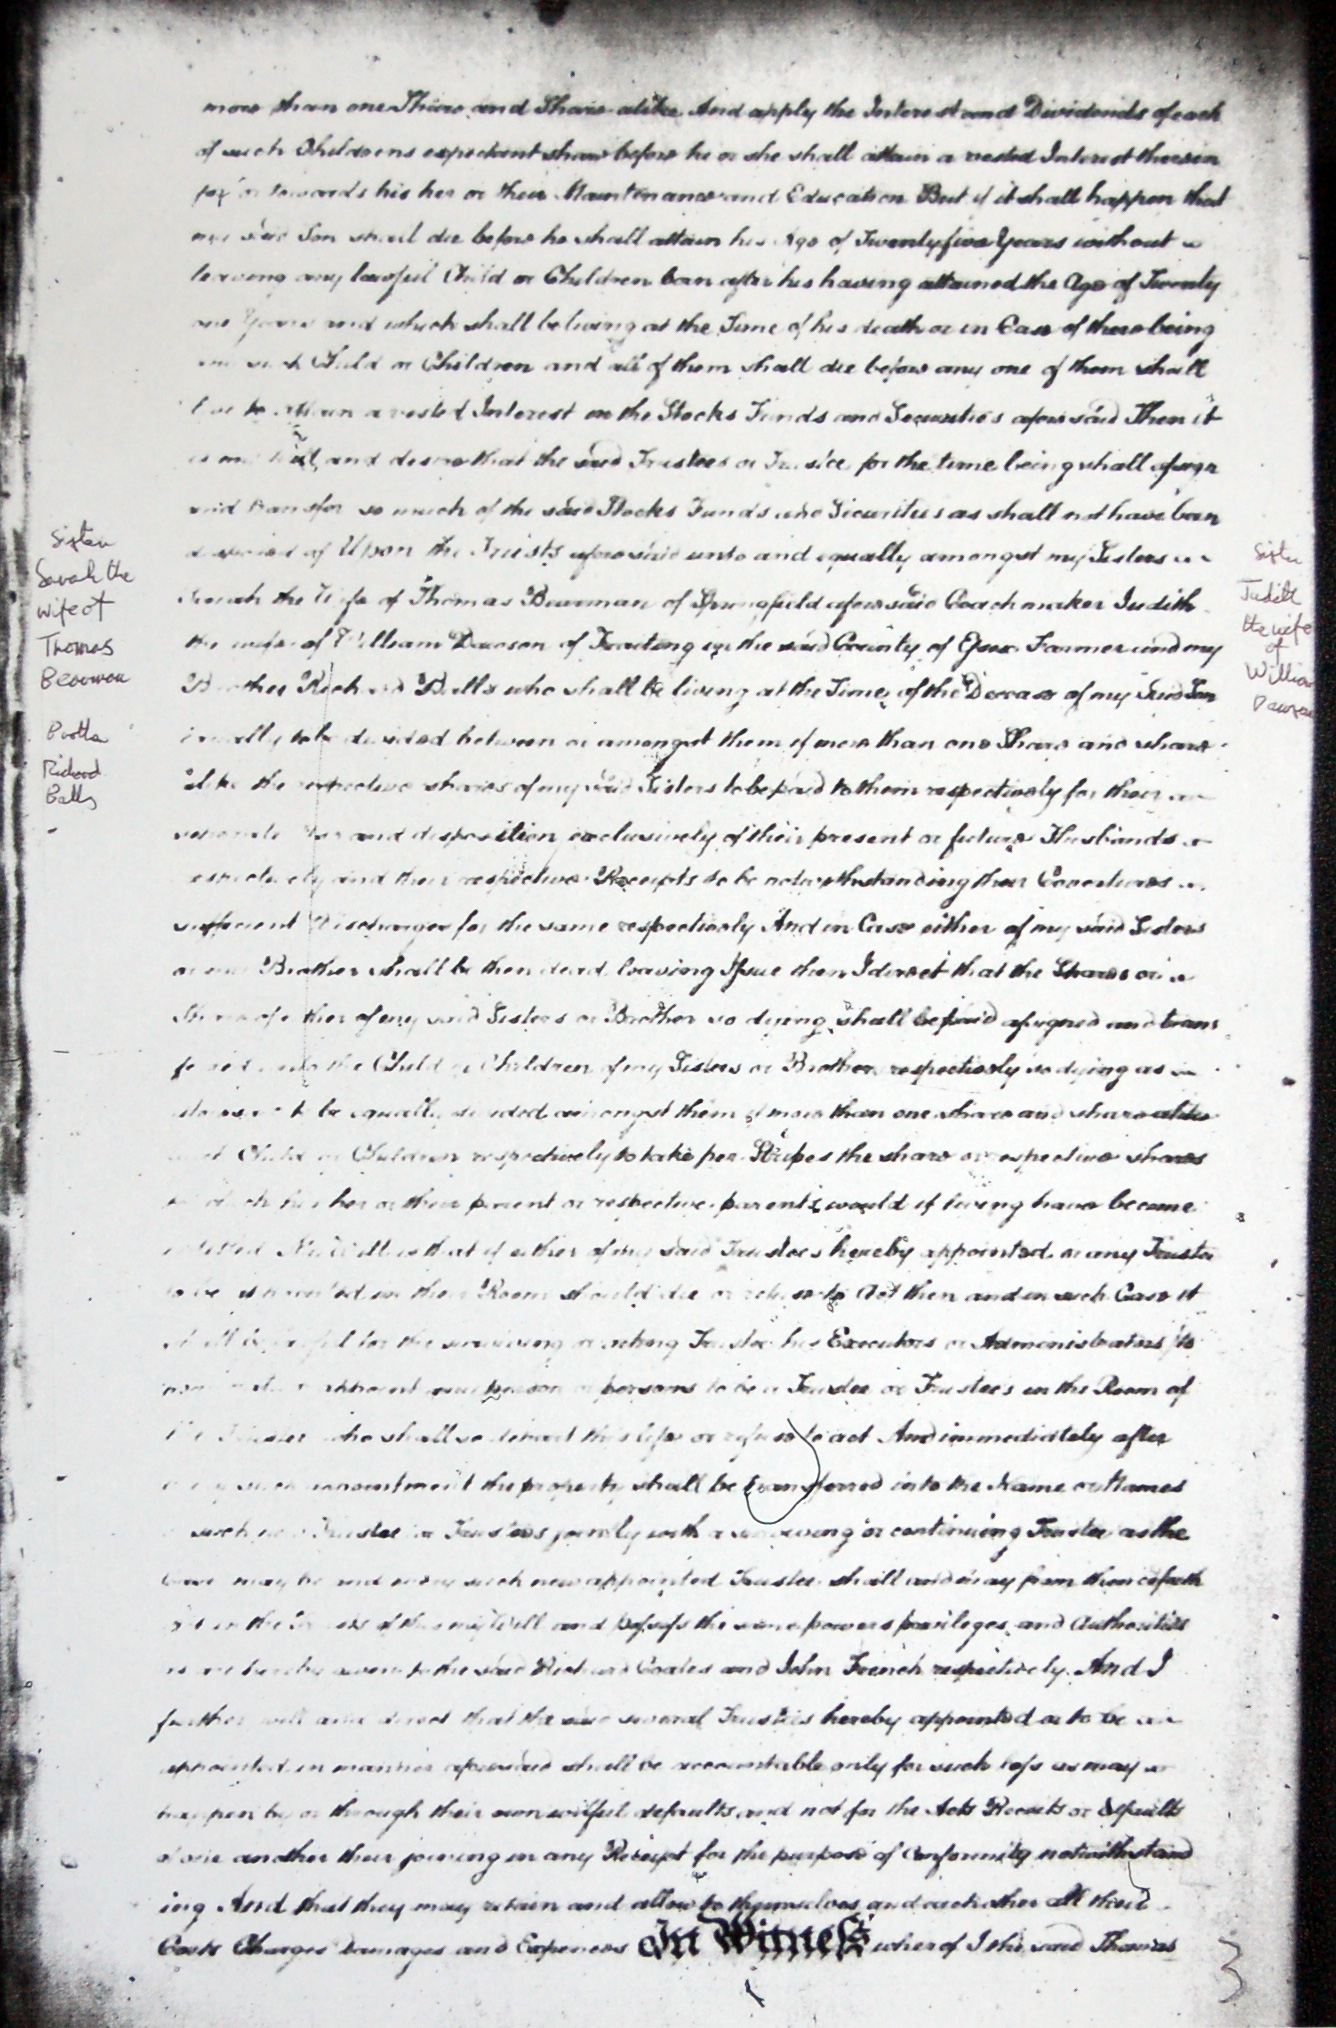 The will of Thomas Frederick Balls proved in 1810, page 3 in which he names his siblings Sarah the wife of Thomas Bearman coachmaker of Springfield, Judith the wife of William Dawson farmer of Freiting and brother Richard as beneficiaries should his only son die.